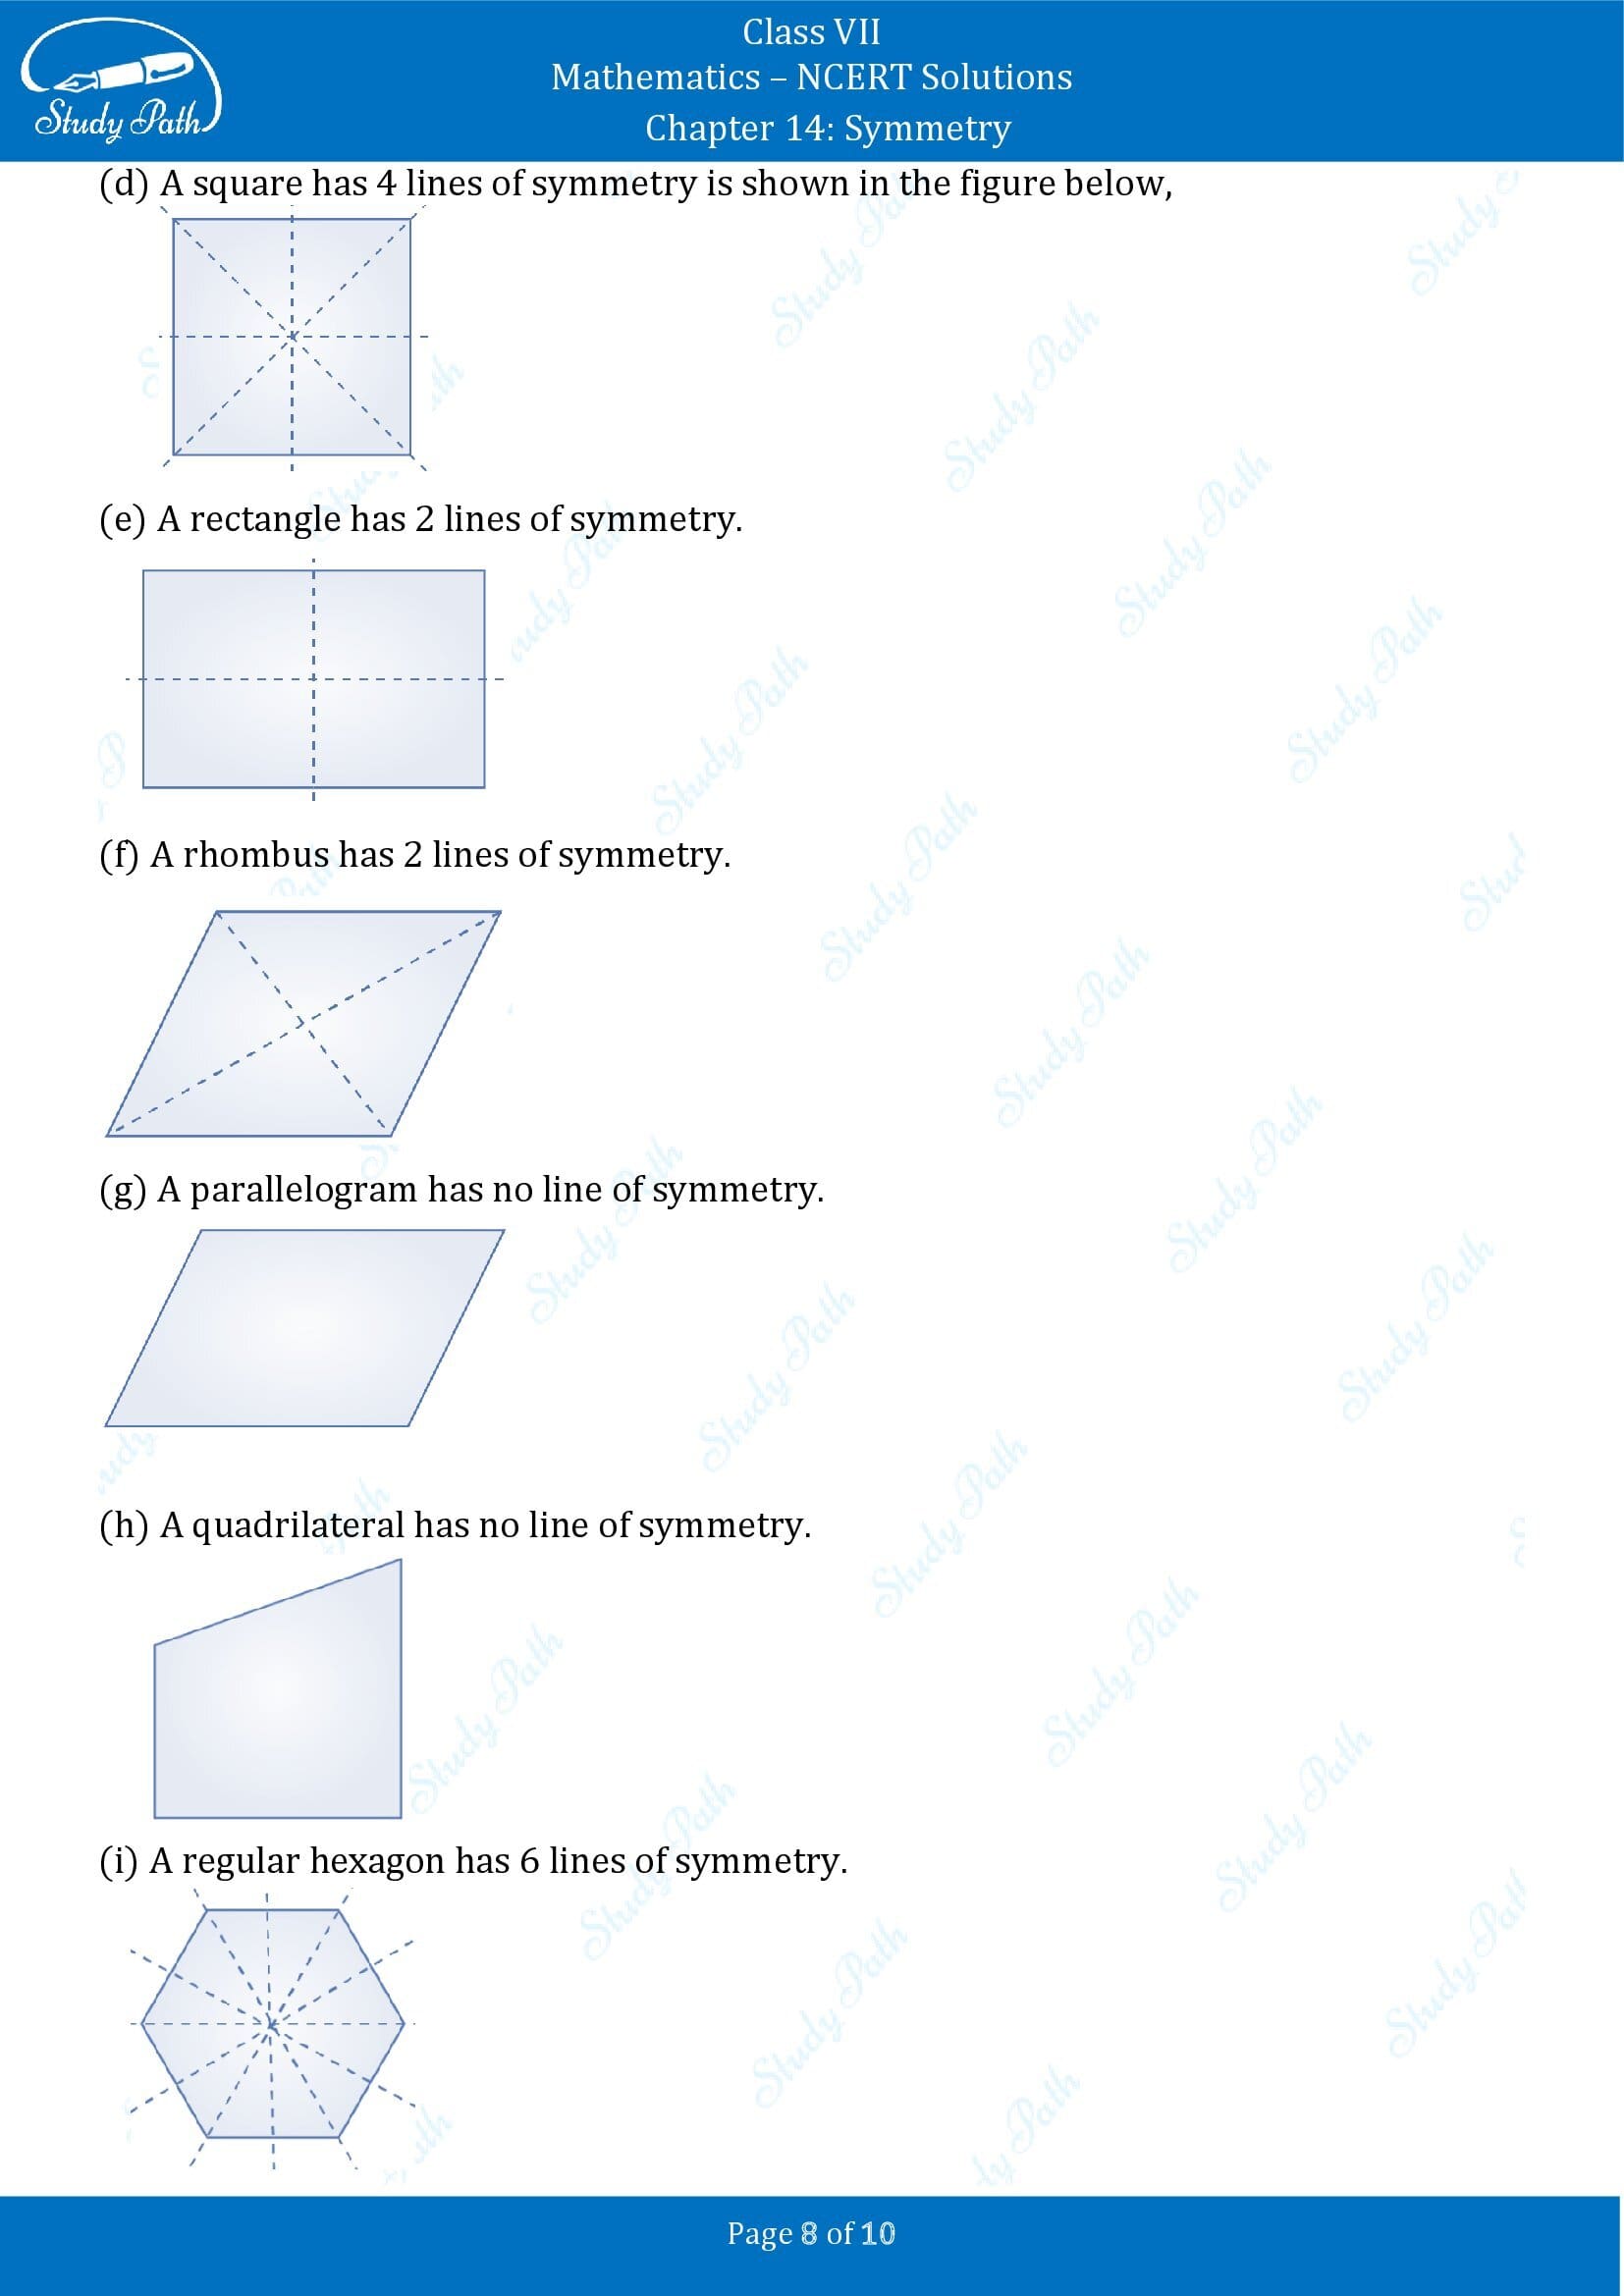 NCERT Solutions for Class 7 Maths Chapter 14 Symmetry Exercise 14.1 00008